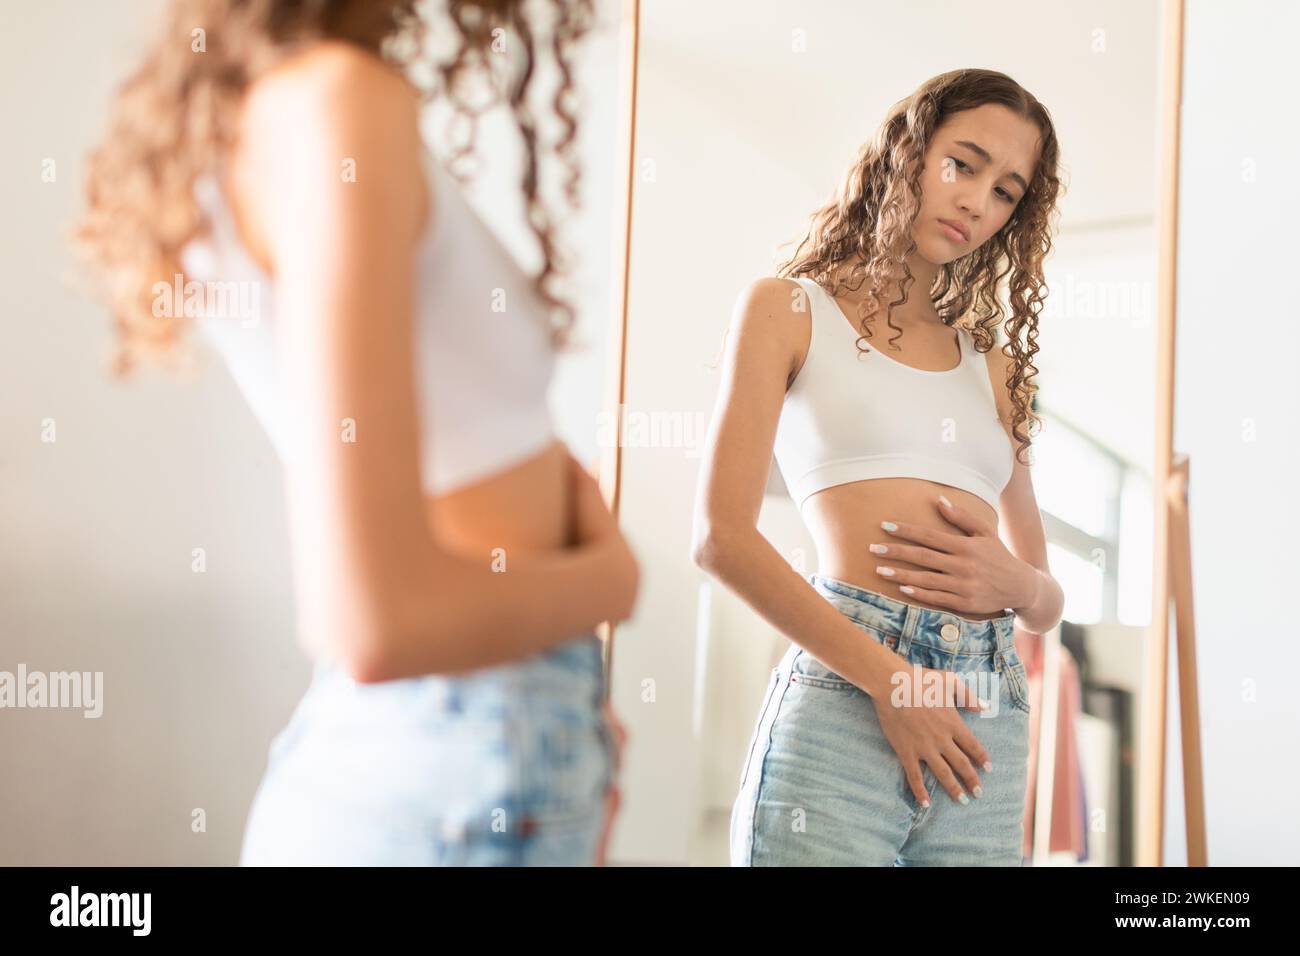 Unhappy teenage girl touching stomach in front of mirror indoor Stock Photo